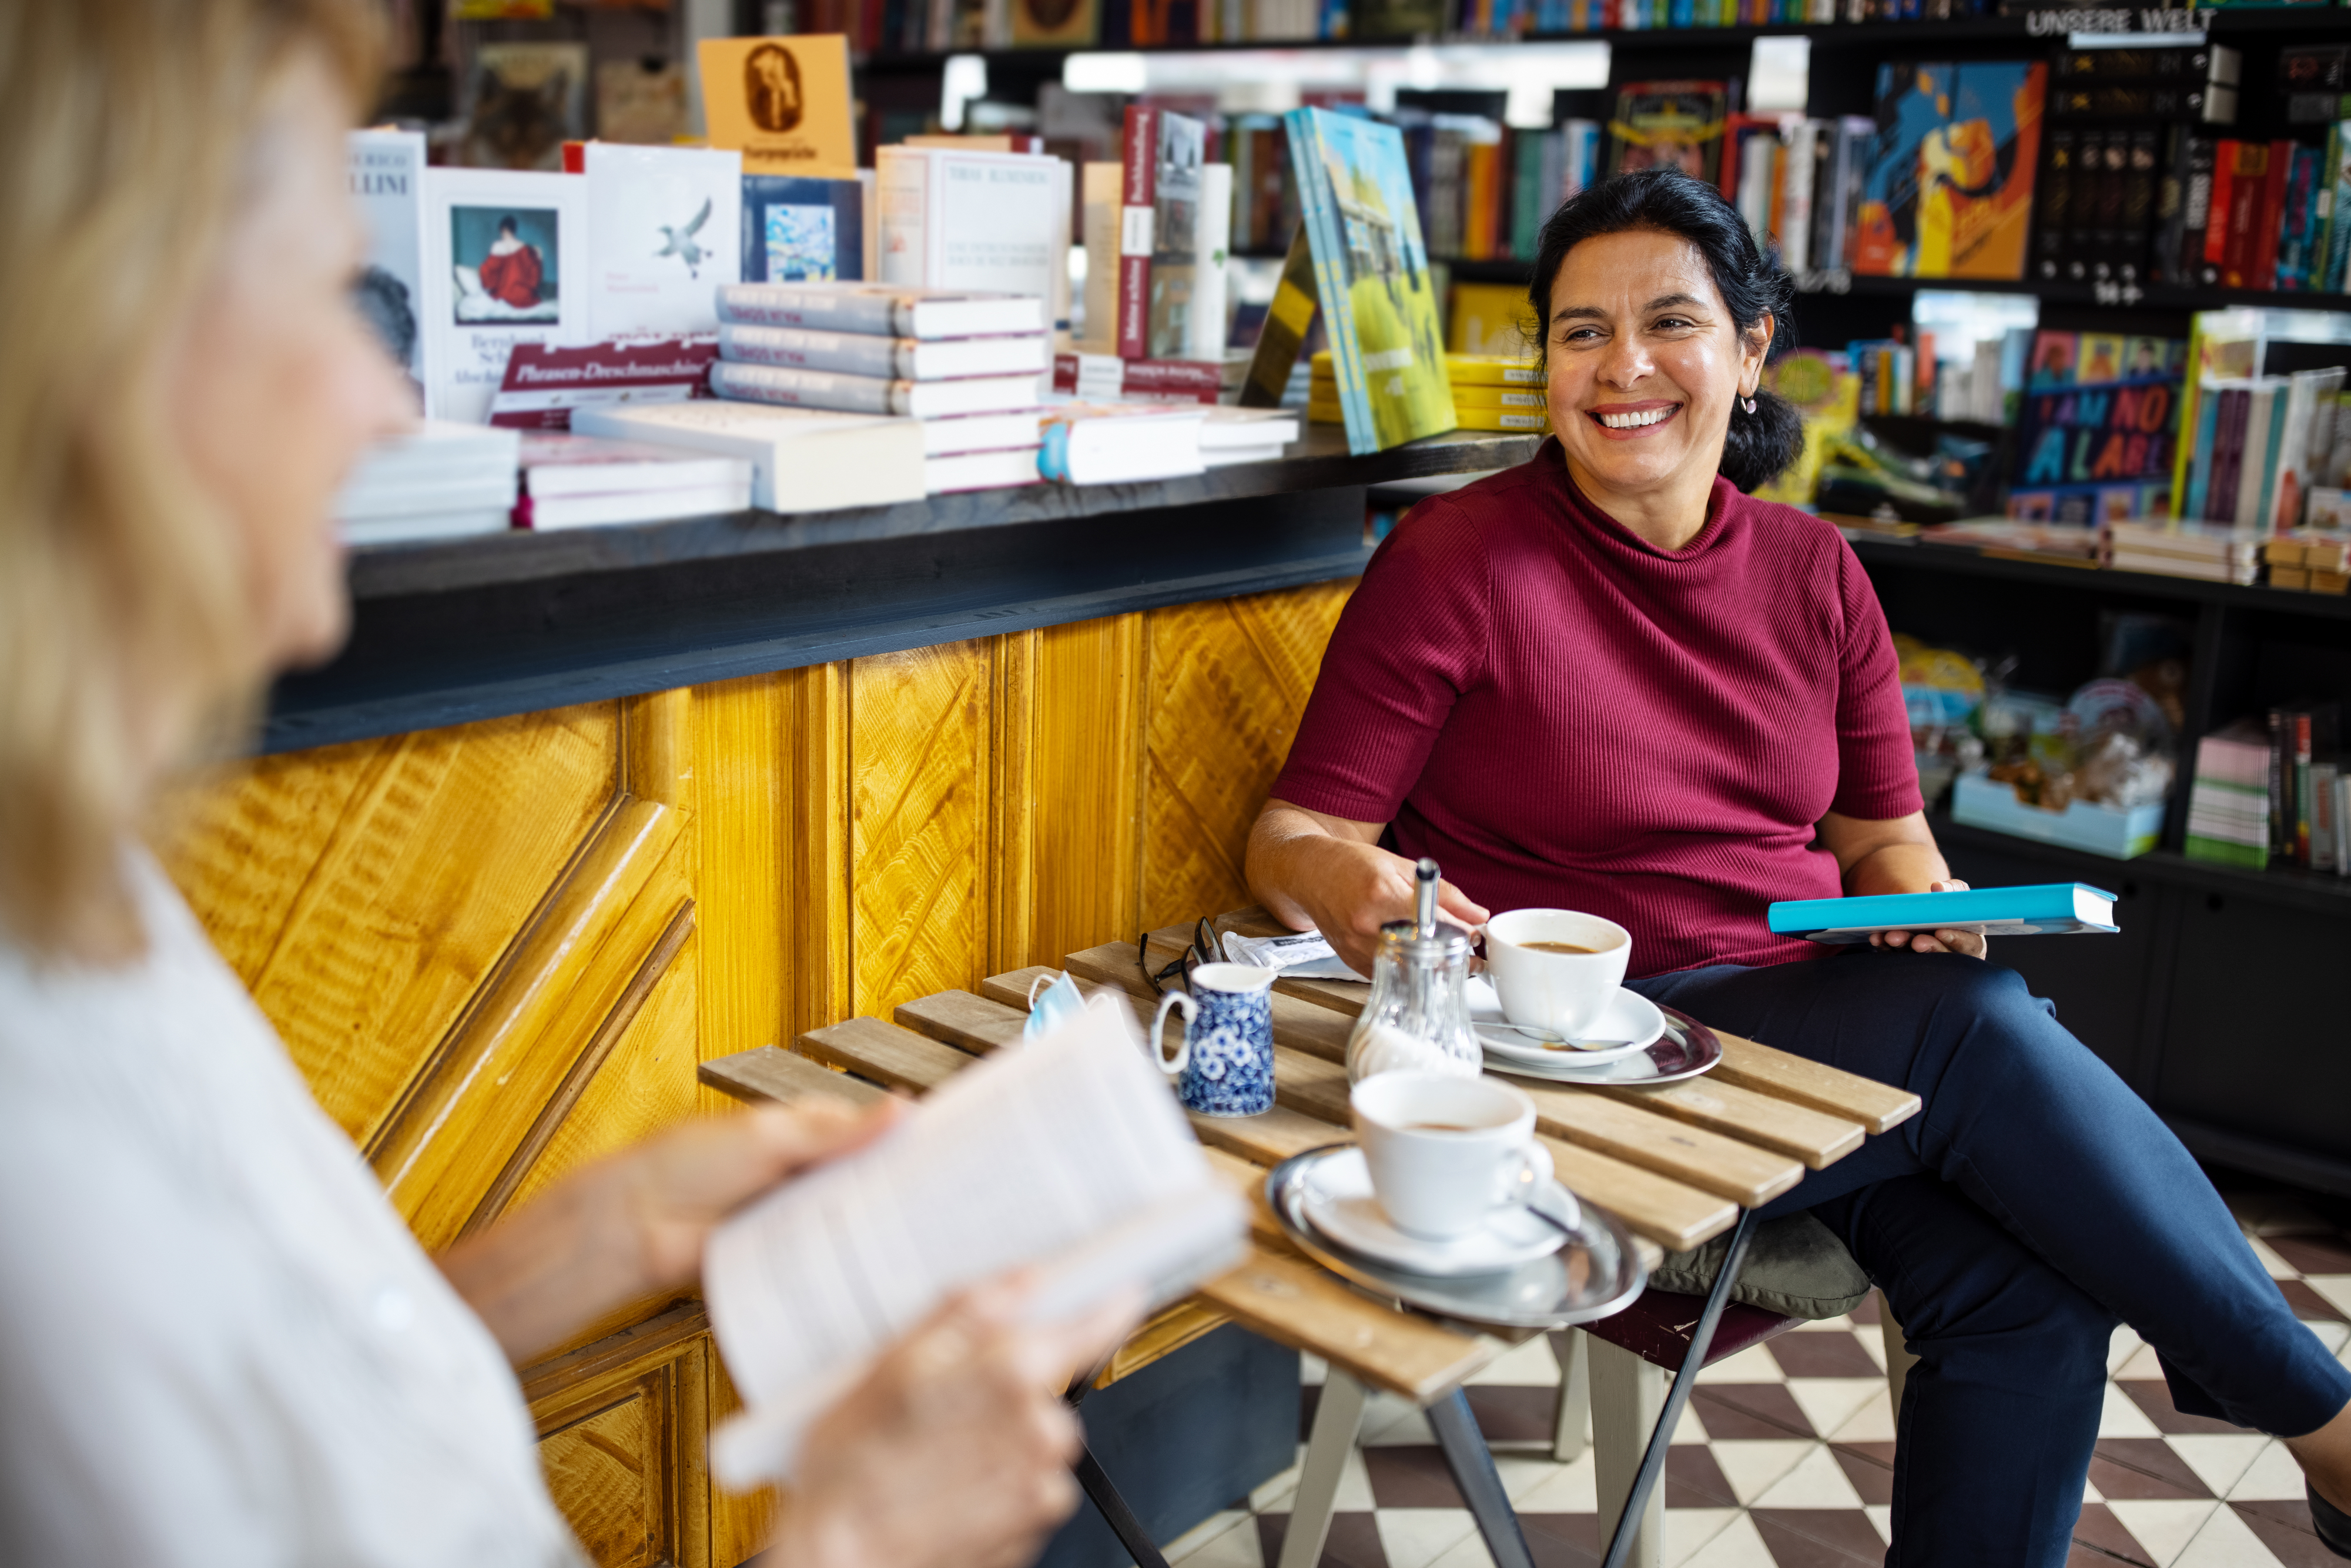 Two women having a conversation over coffee at a table in a bookstore, with one woman holding a book and smiling at the other